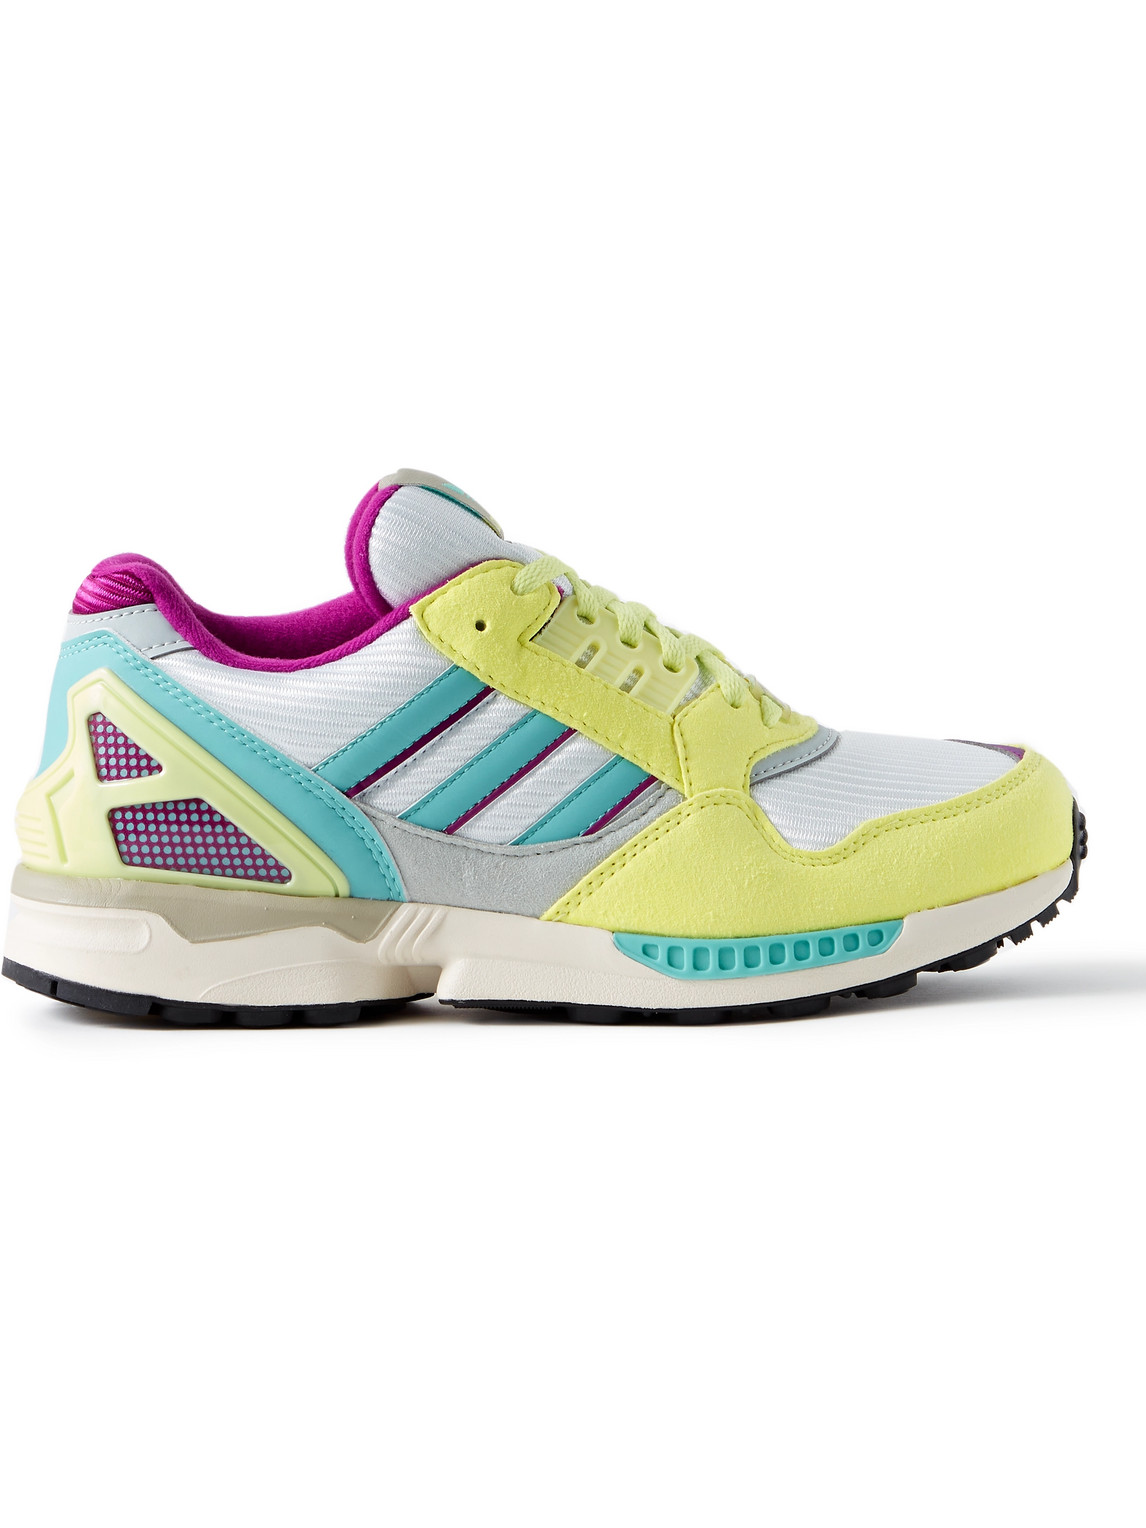 Adidas Consortium Zx9000 Leather-trimmed Suede And Mesh Sneakers In Multicolor